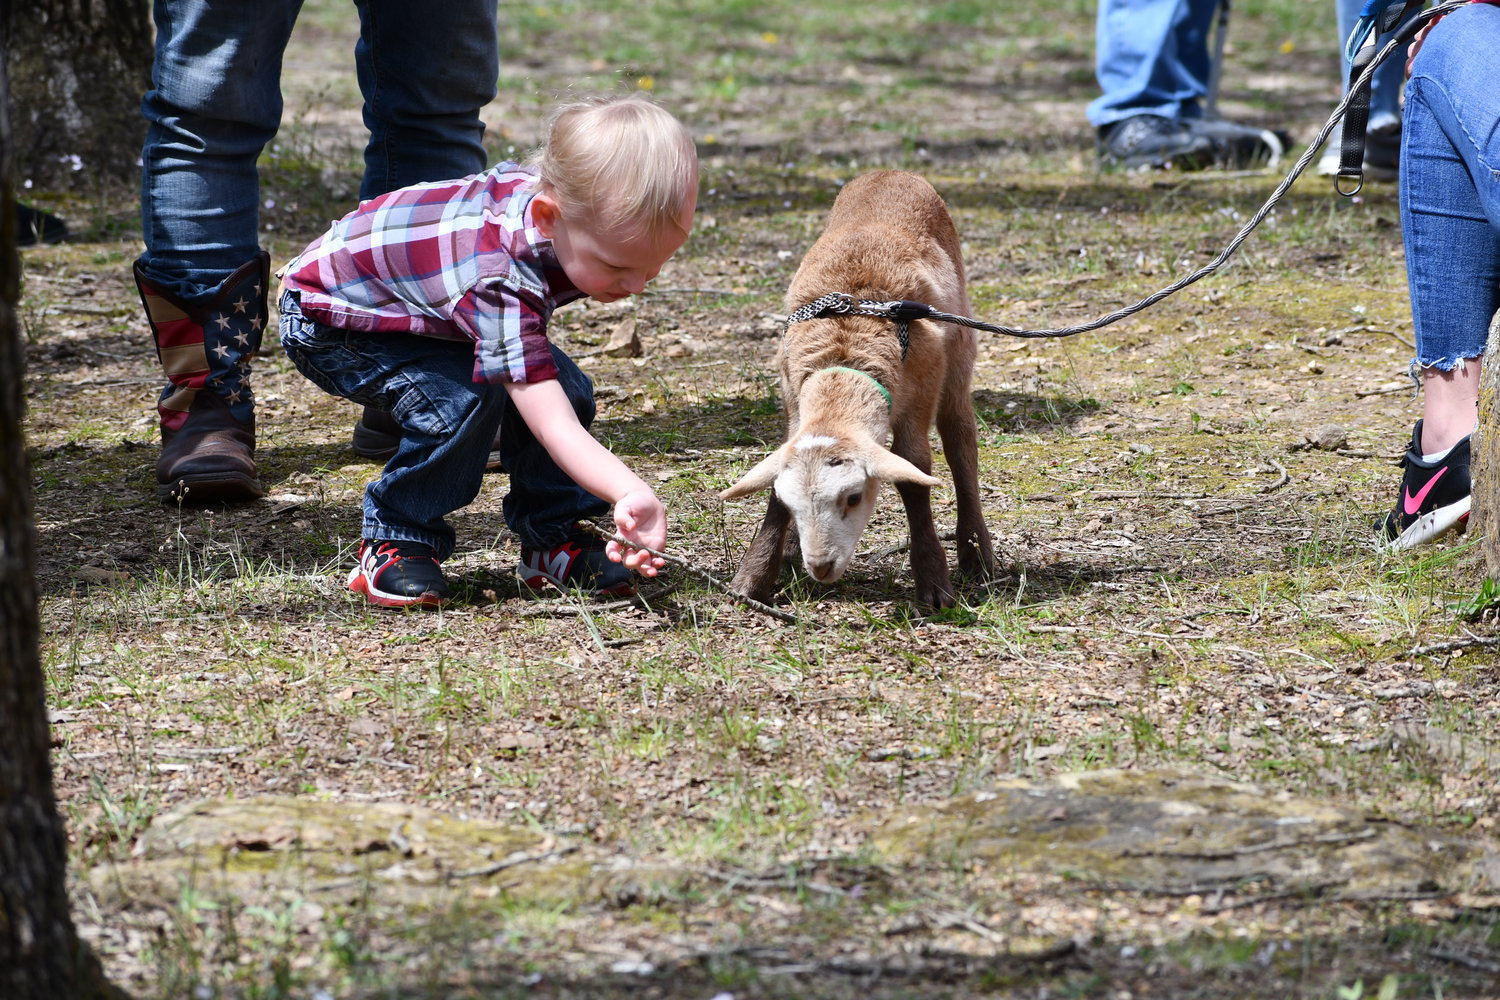 Tyler Collins doesn’t think the baby goat needs any eggs to munch on, but a good stick might work.